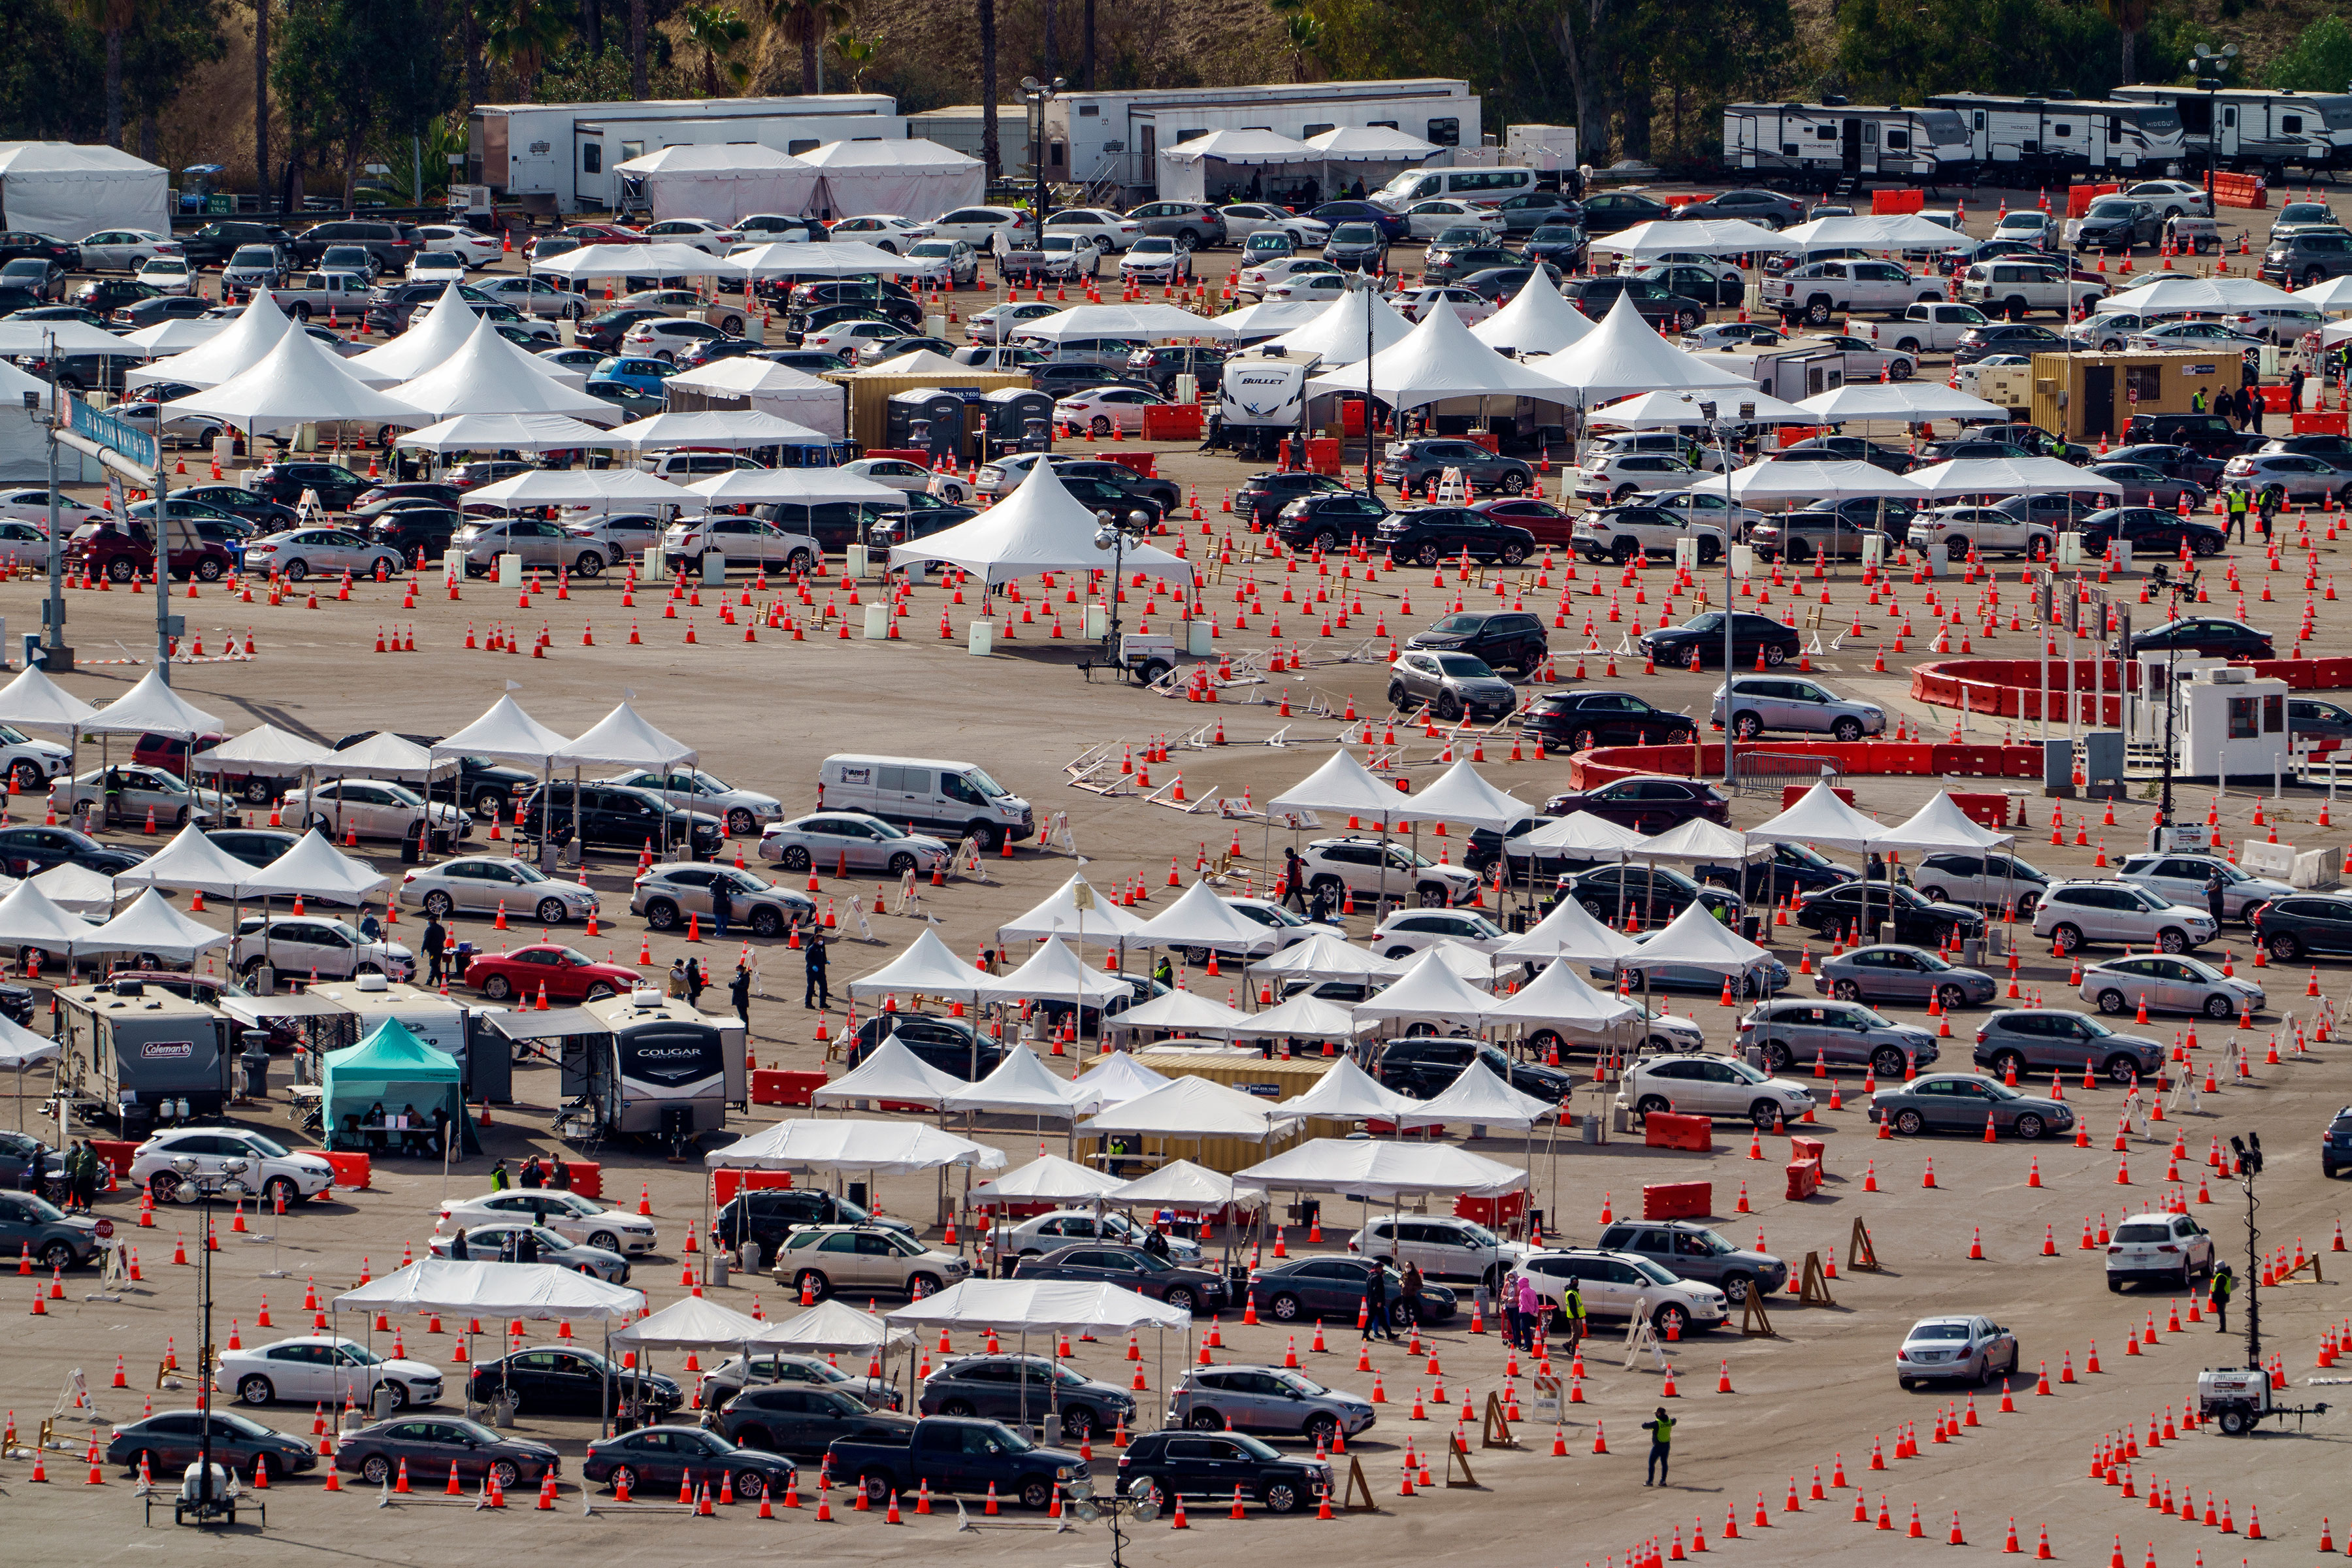 Drivers wait in line at a Covid-19 vaccination site in the parking lot of Dodger Stadium in Los Angeles on January 27.